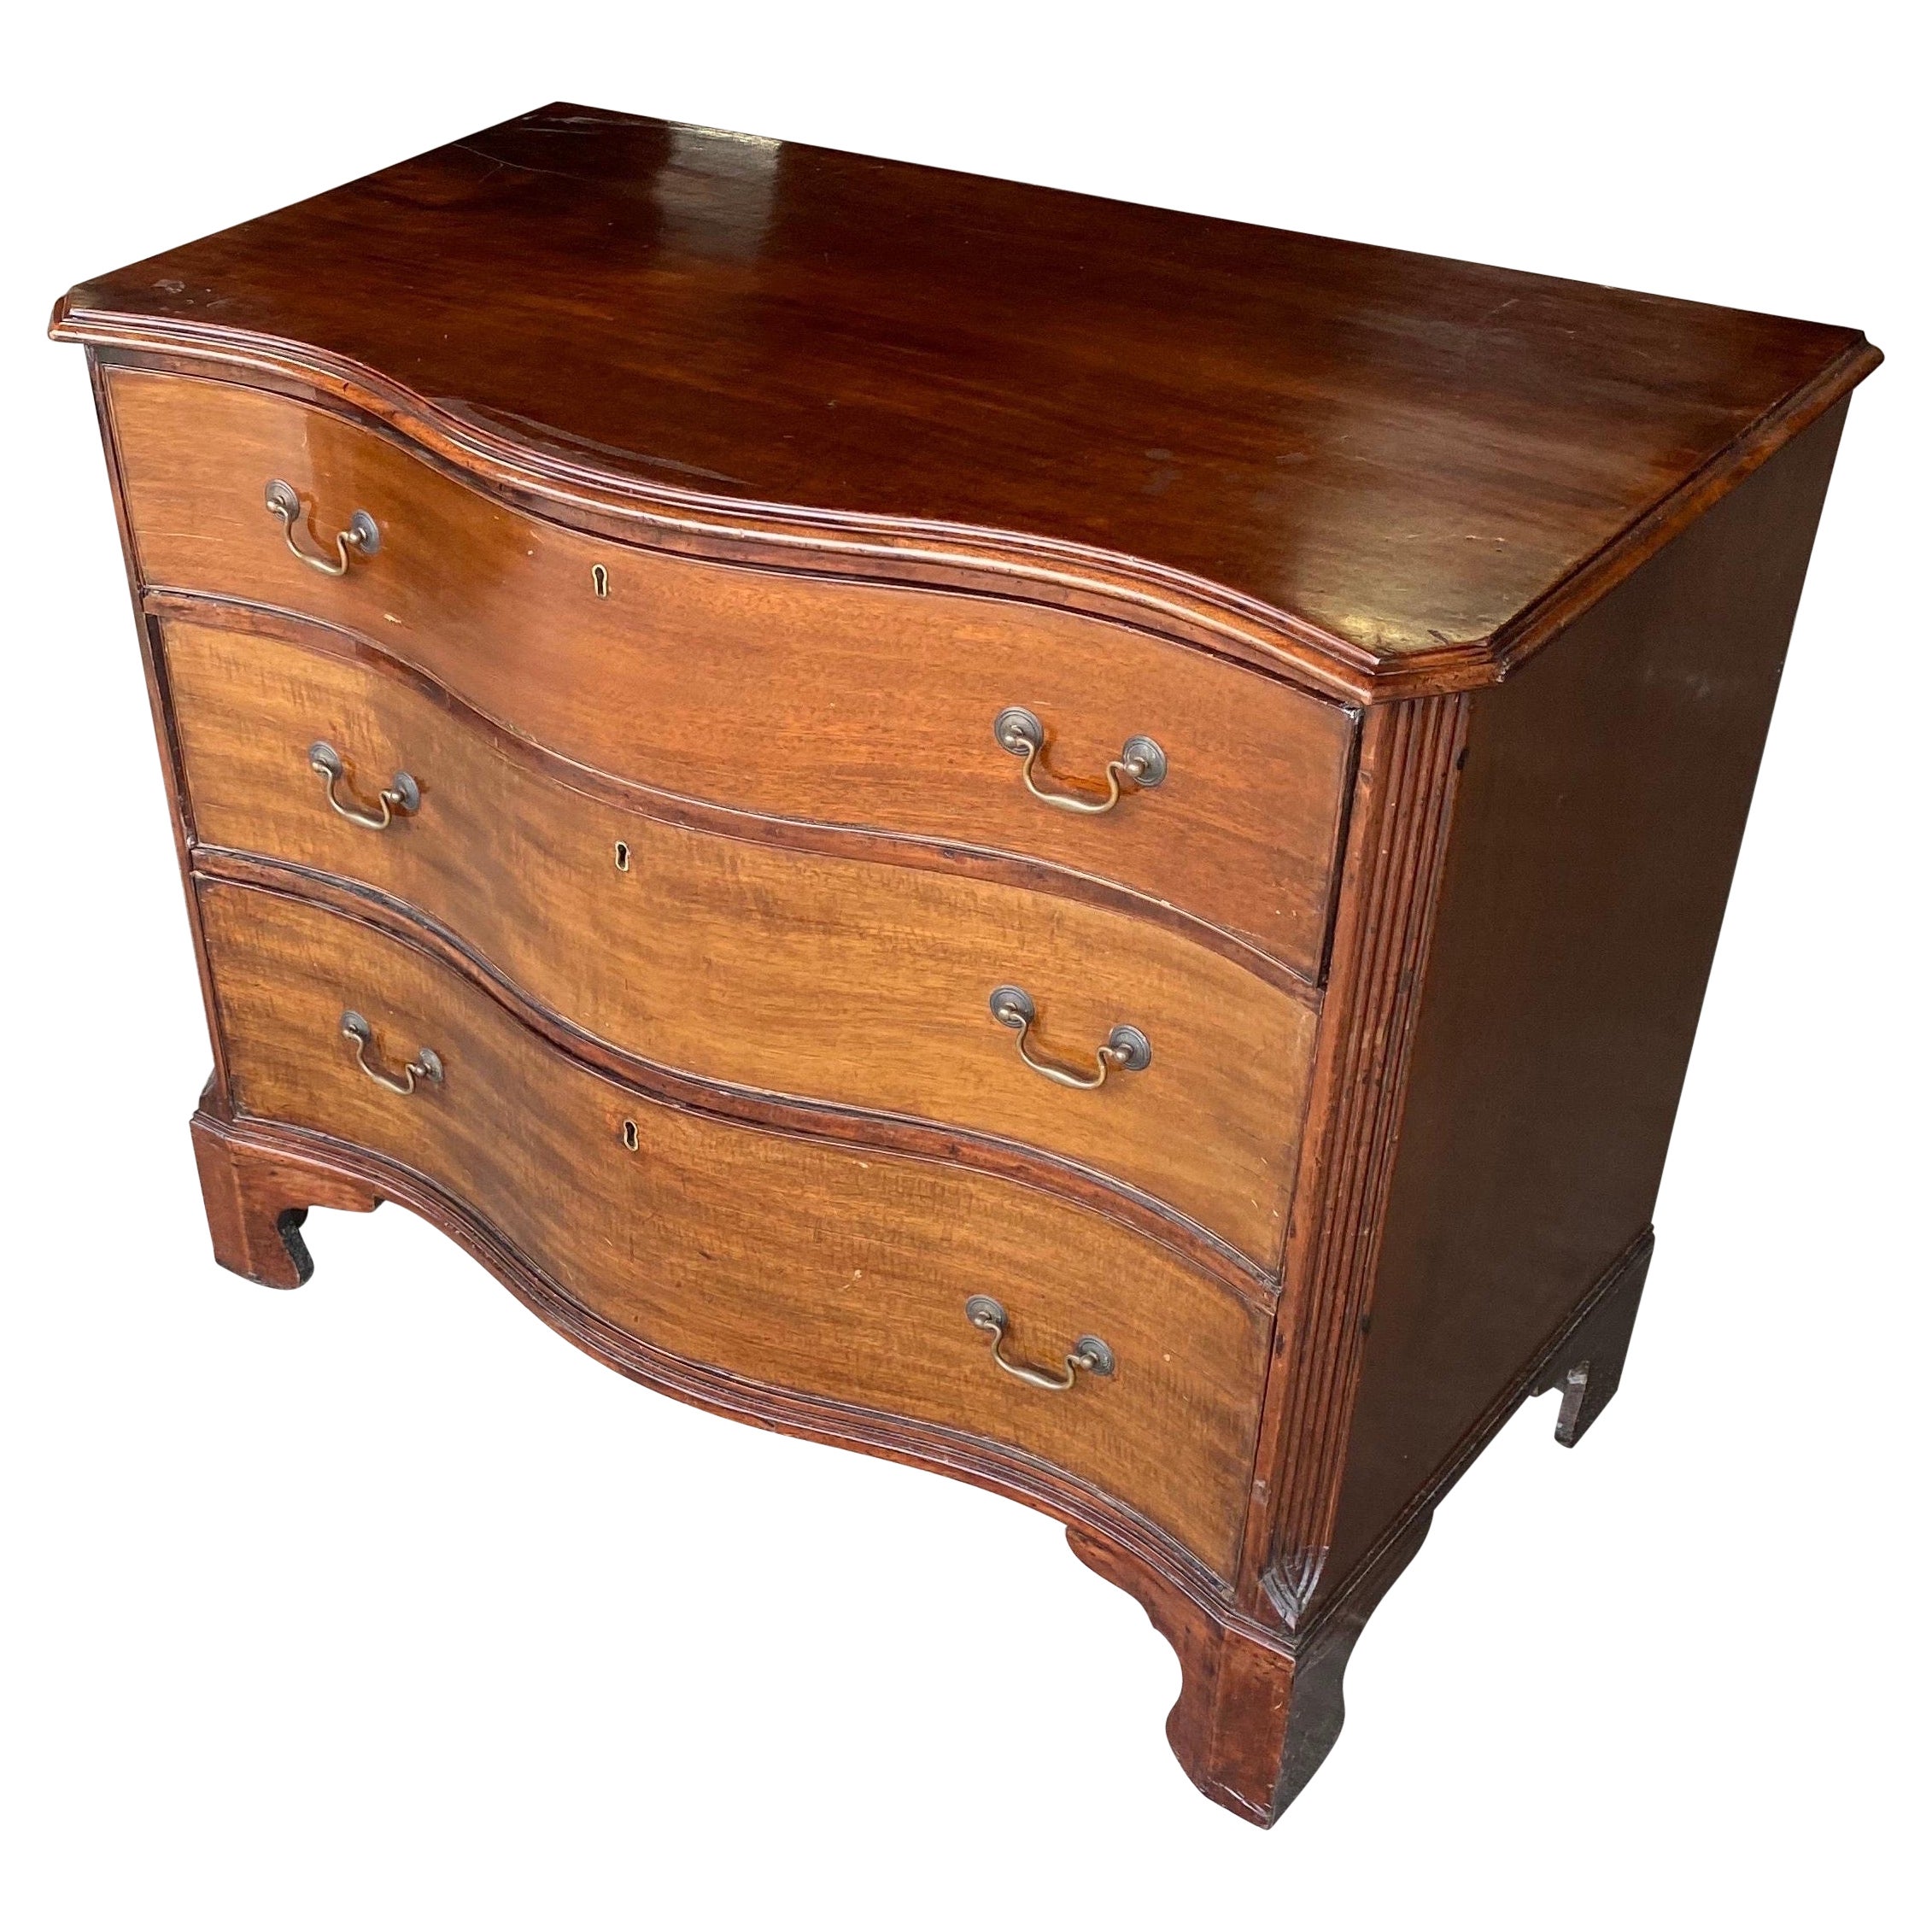 18th-Early 19th Century Georgian Mahogany Serpentine Bedside Chest